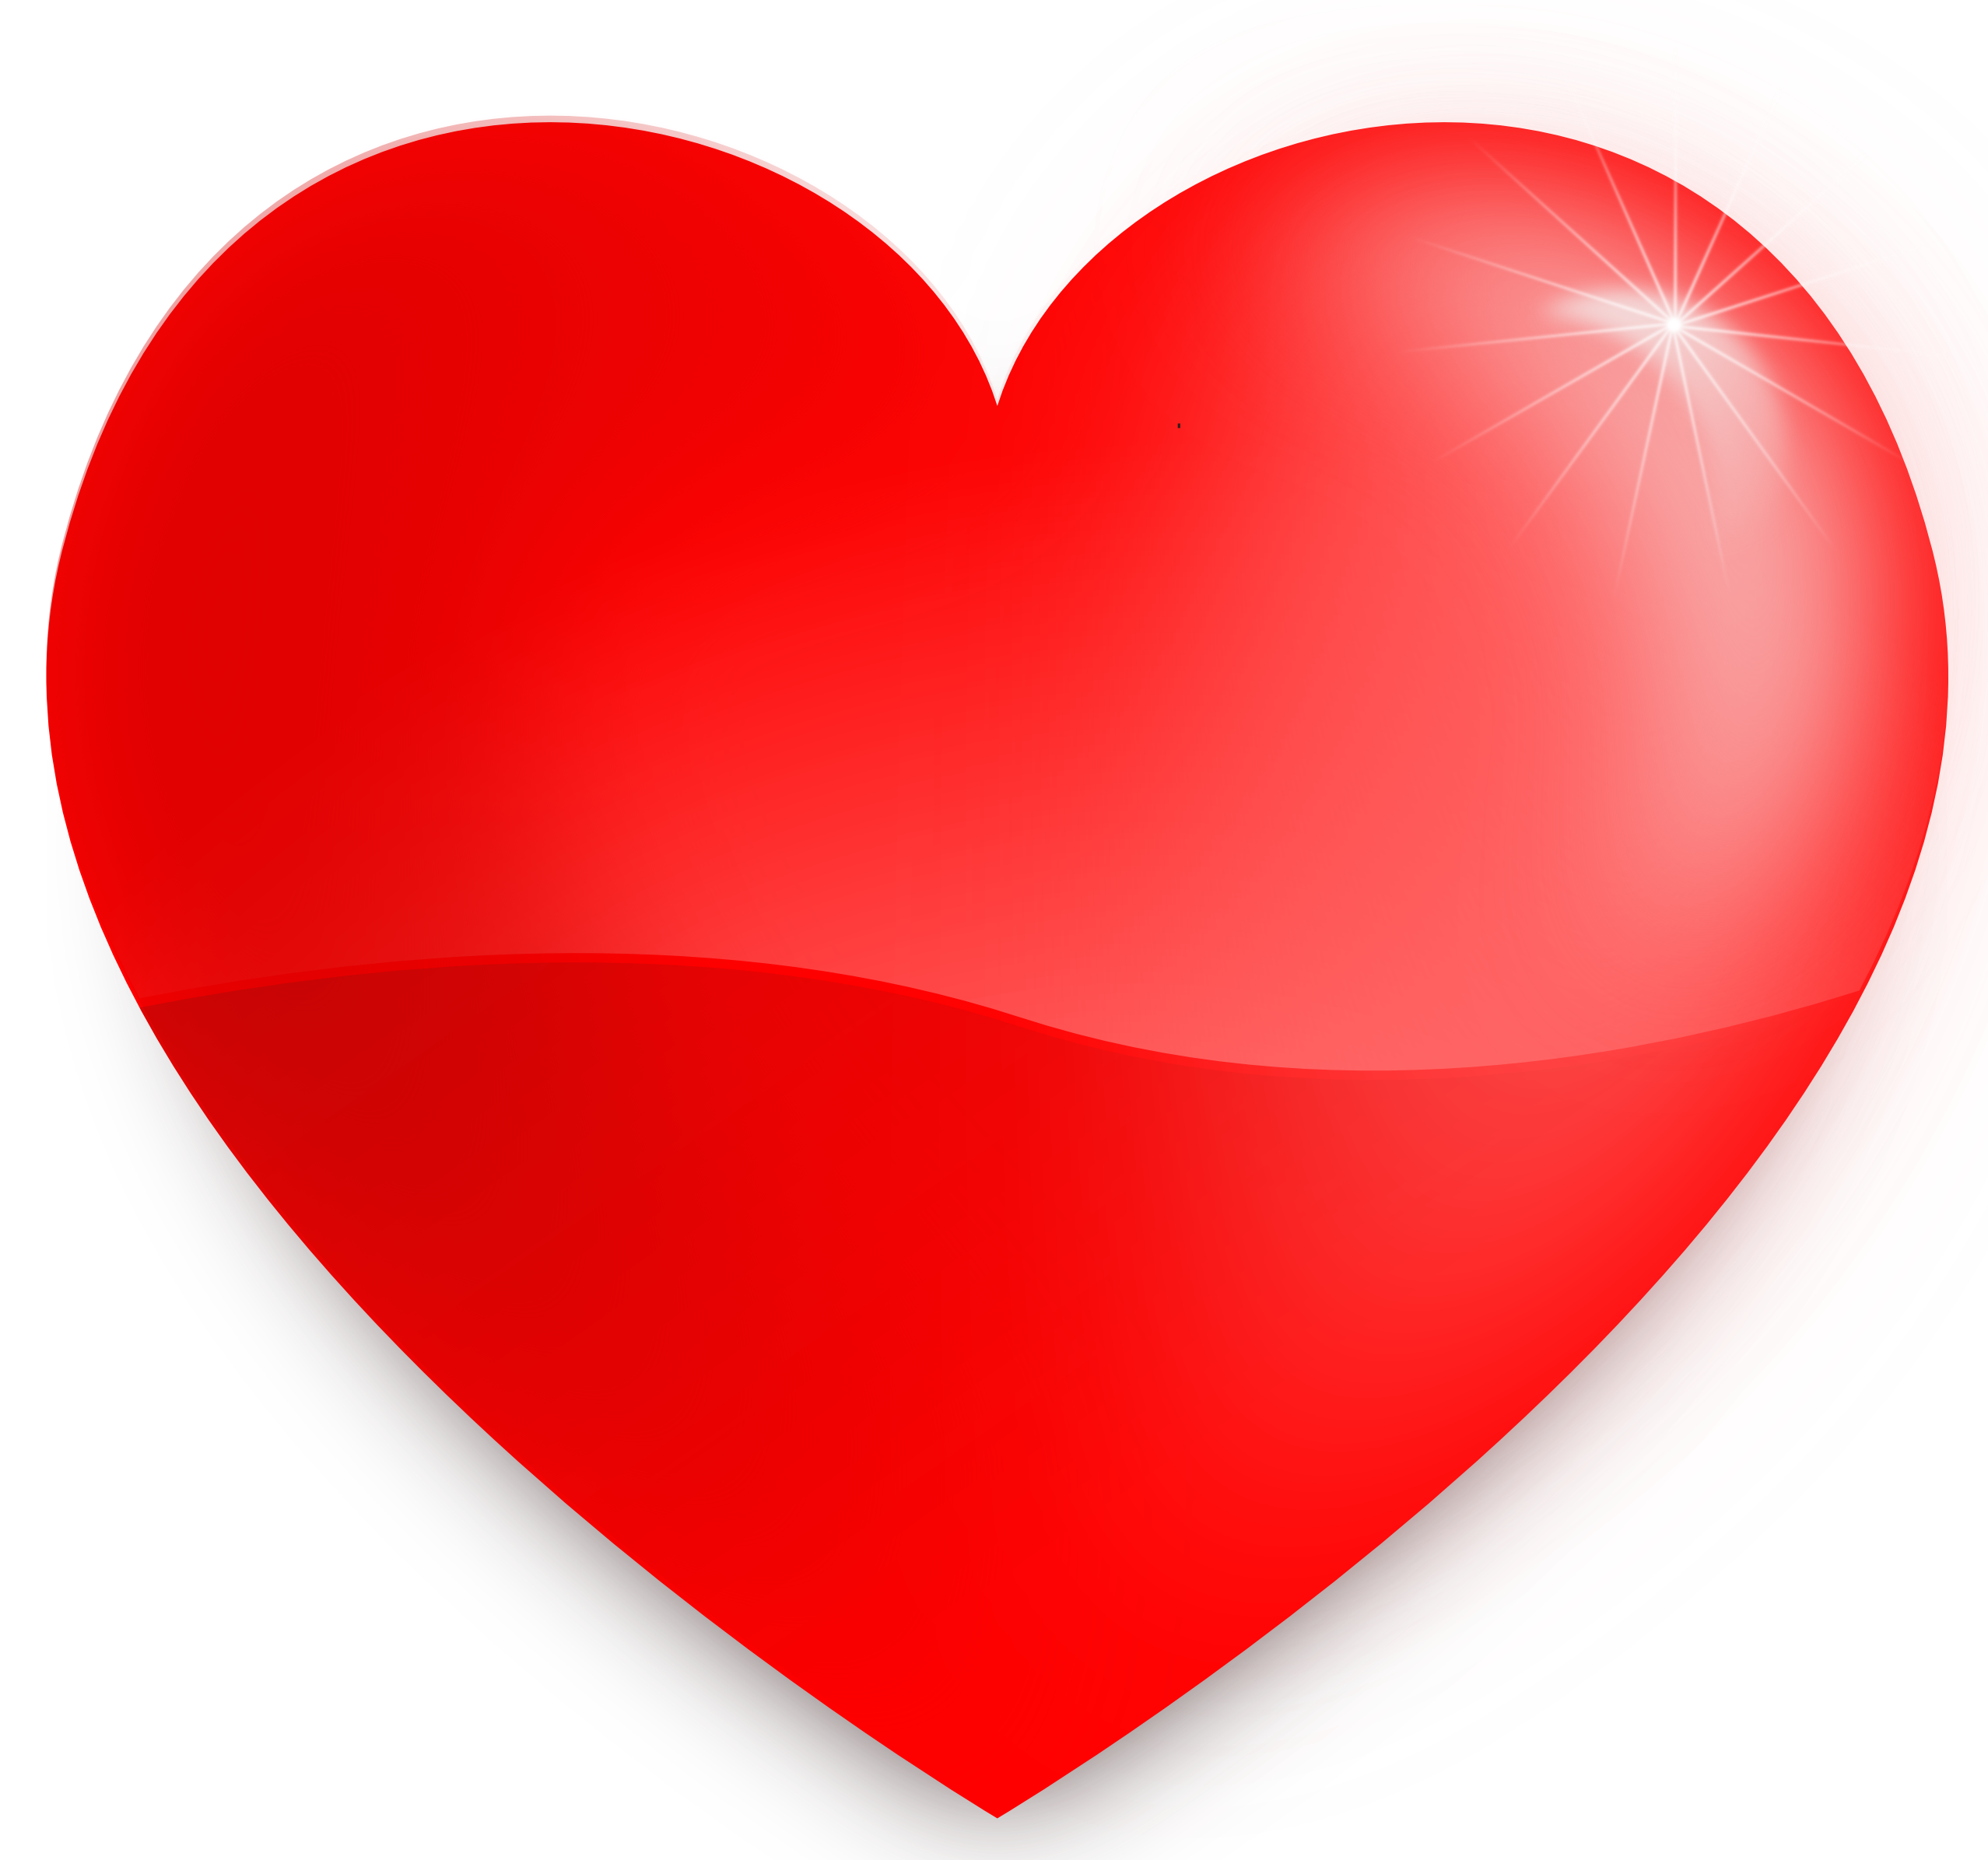 heart images free download